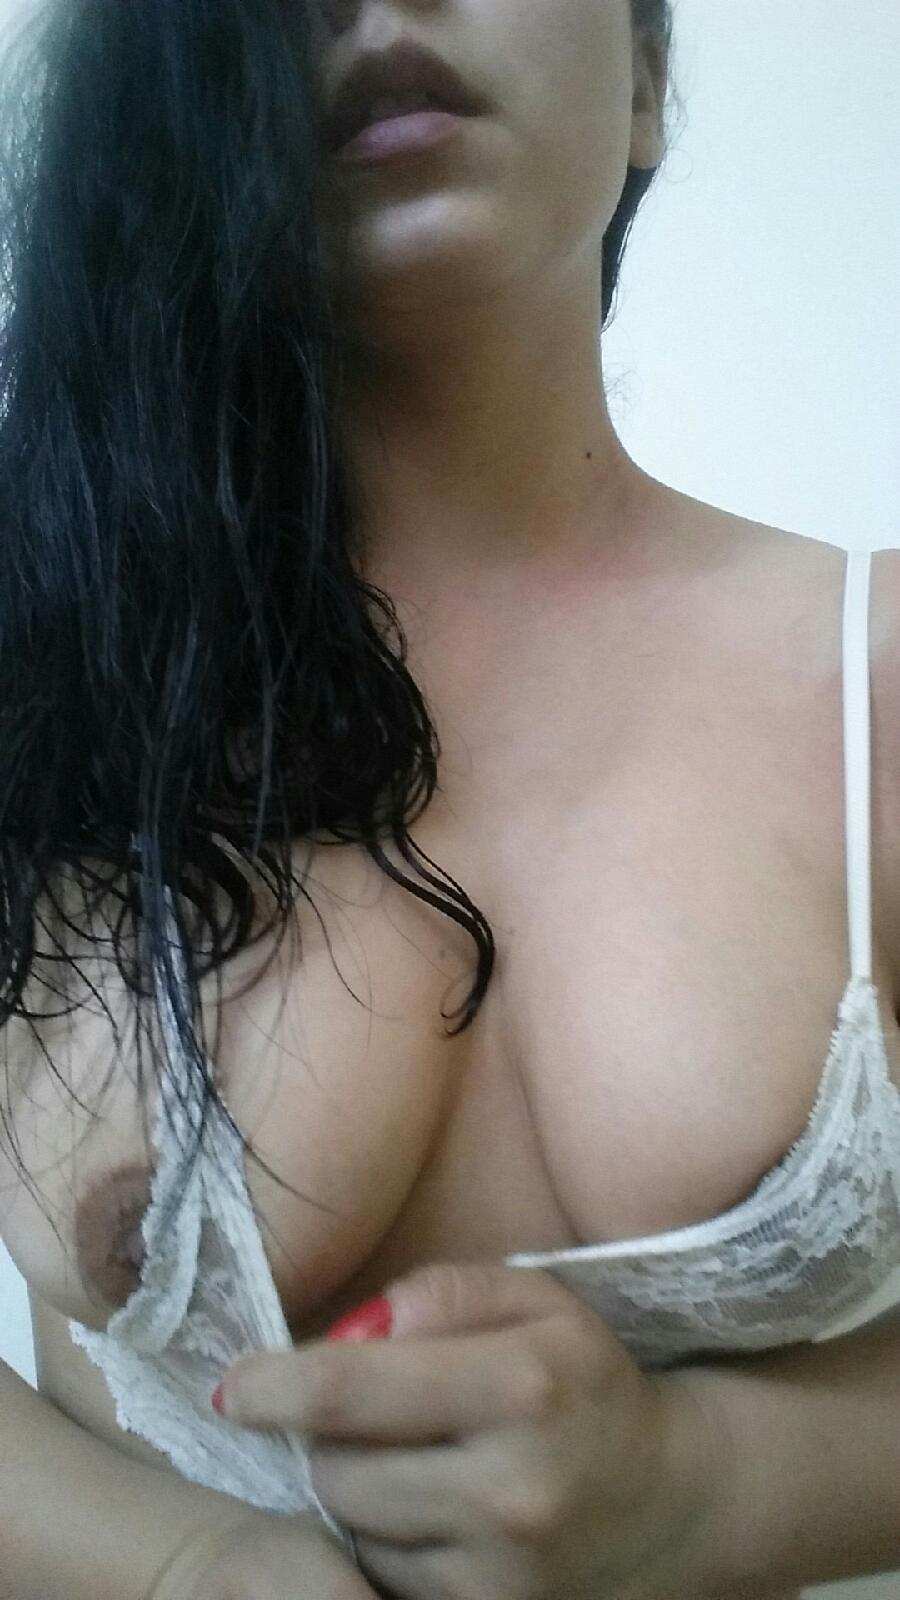 How bout this shot (f)